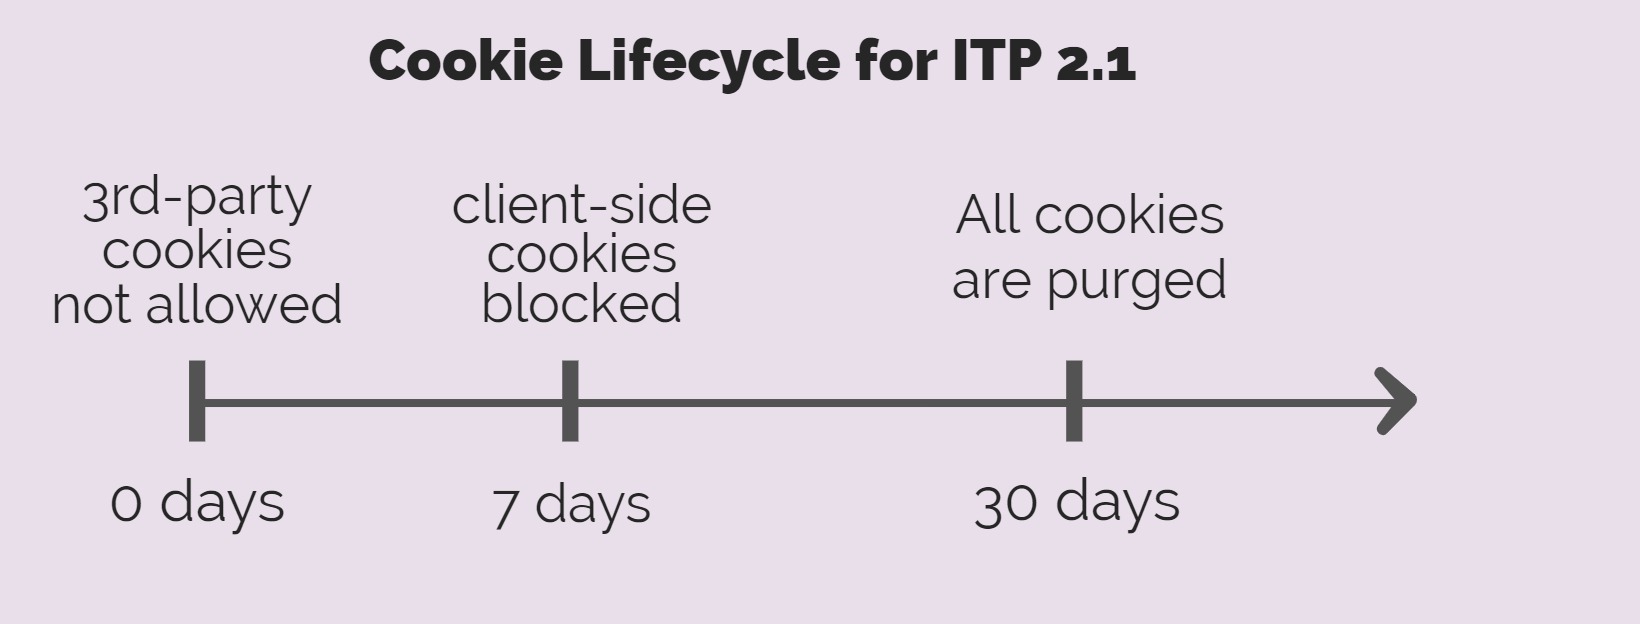 Apple ITP 2.1 Cookie Lifecycle